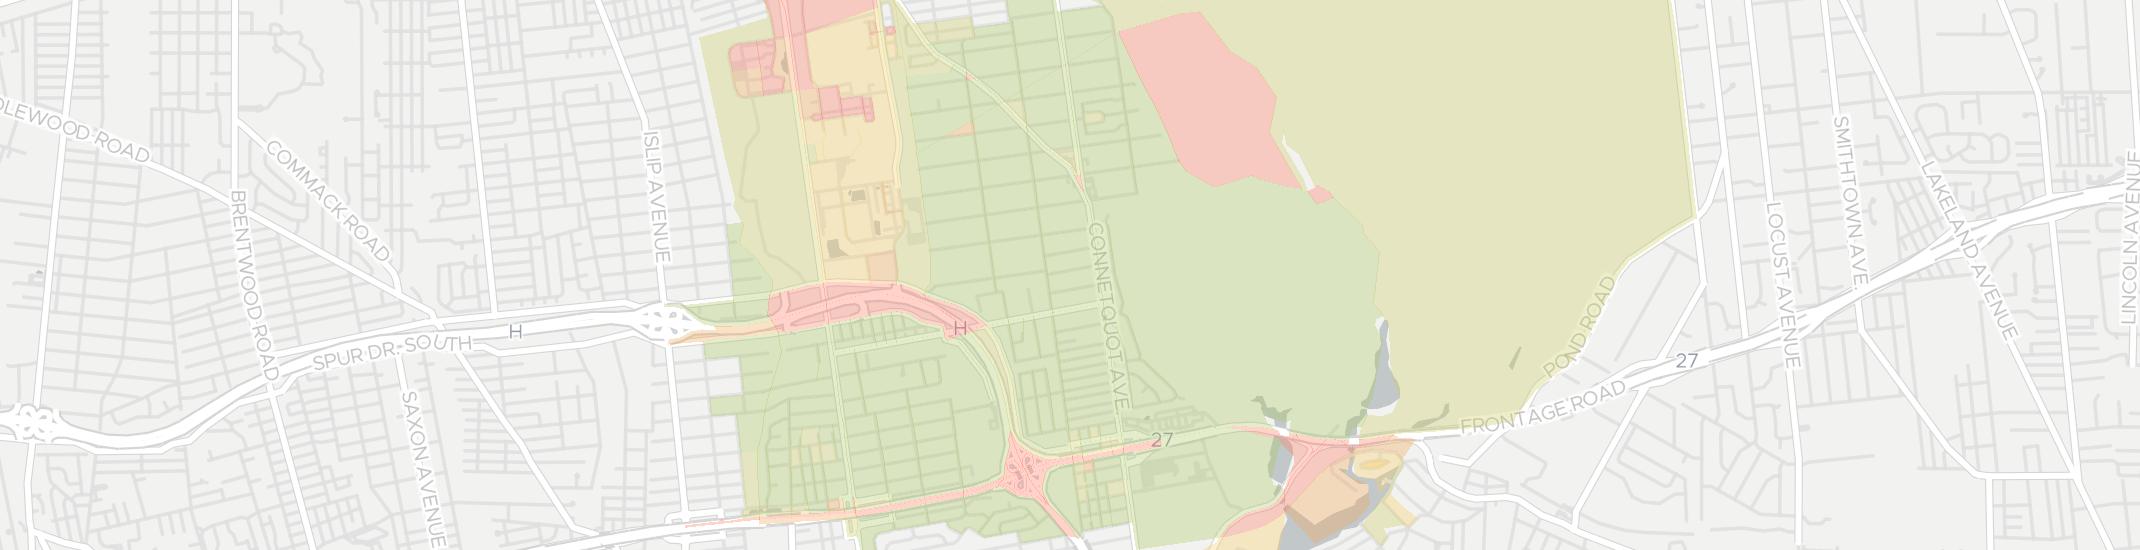 Islip Terrace Internet Competition Map. Click for interactive map.